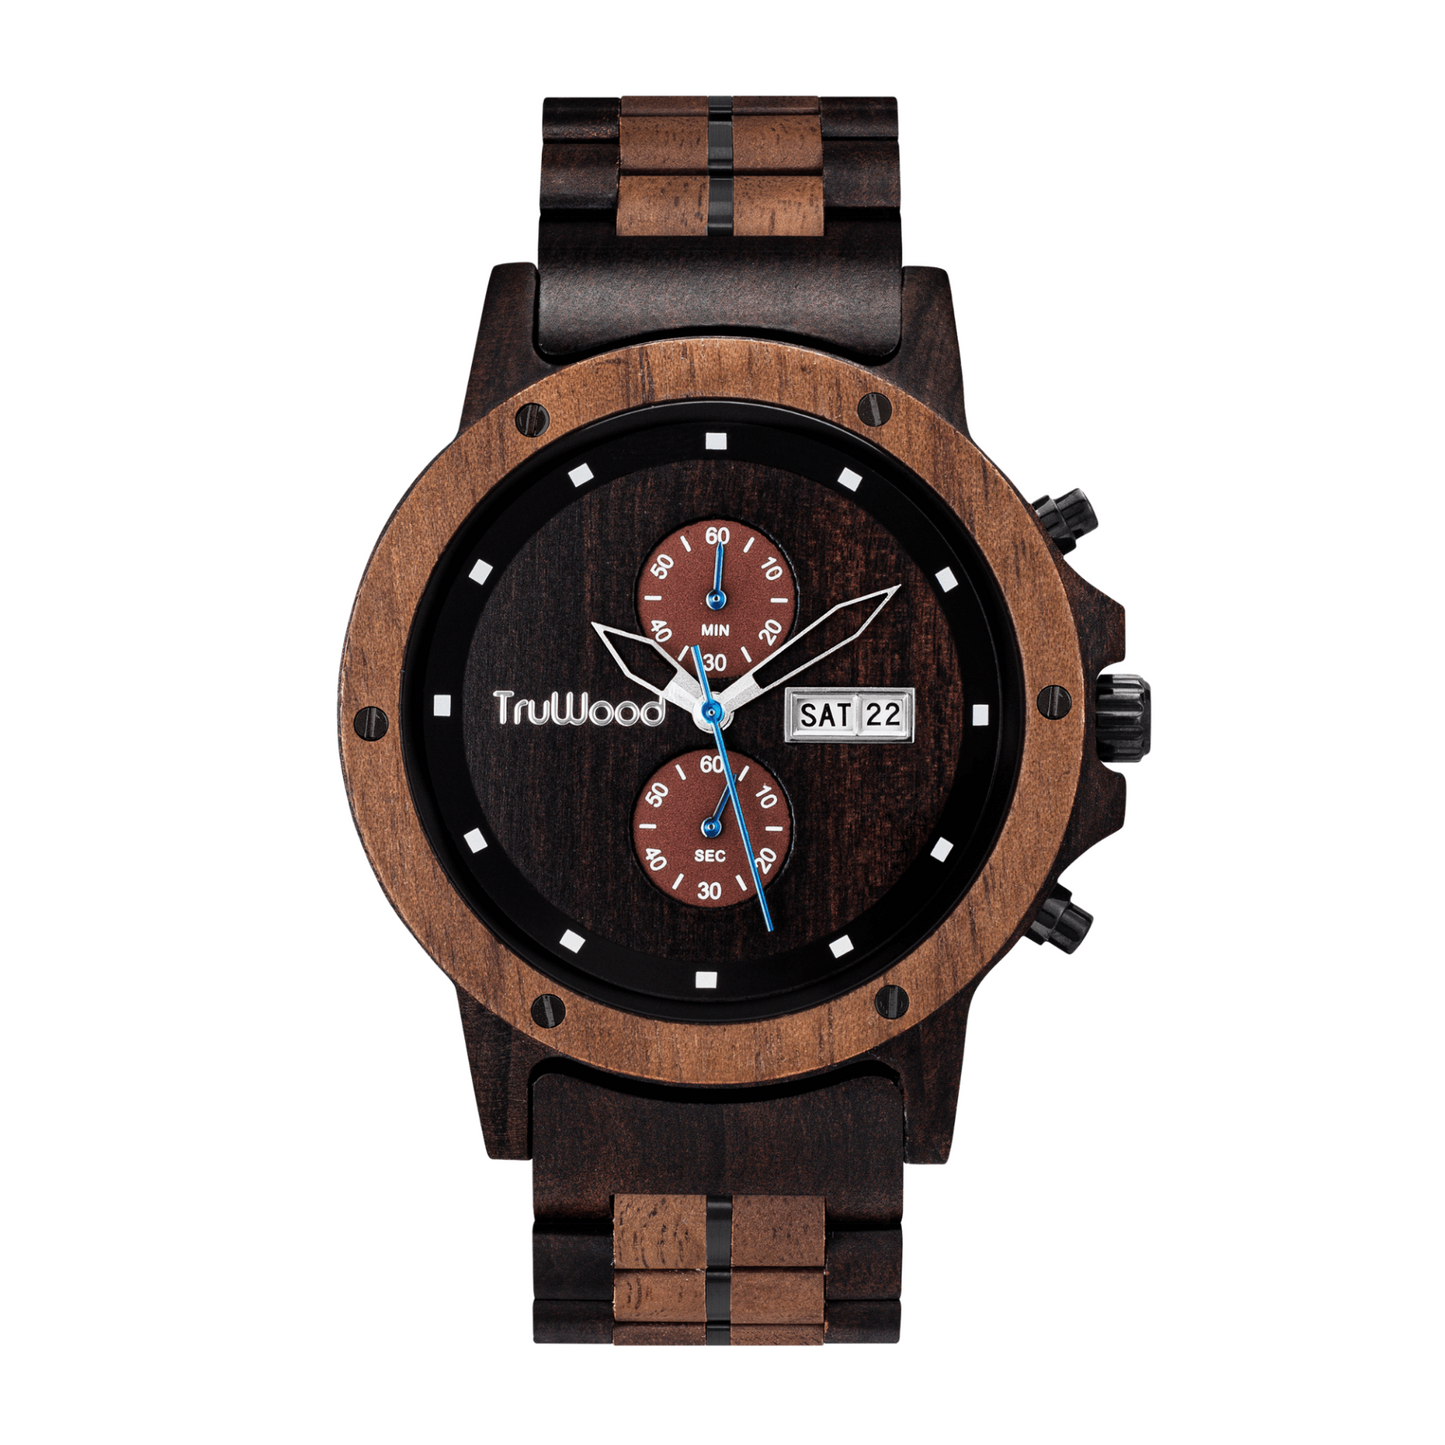 Cascade - The Next Generation Wood Watch with Miyota OS00 Movement, Goodies N Stuff